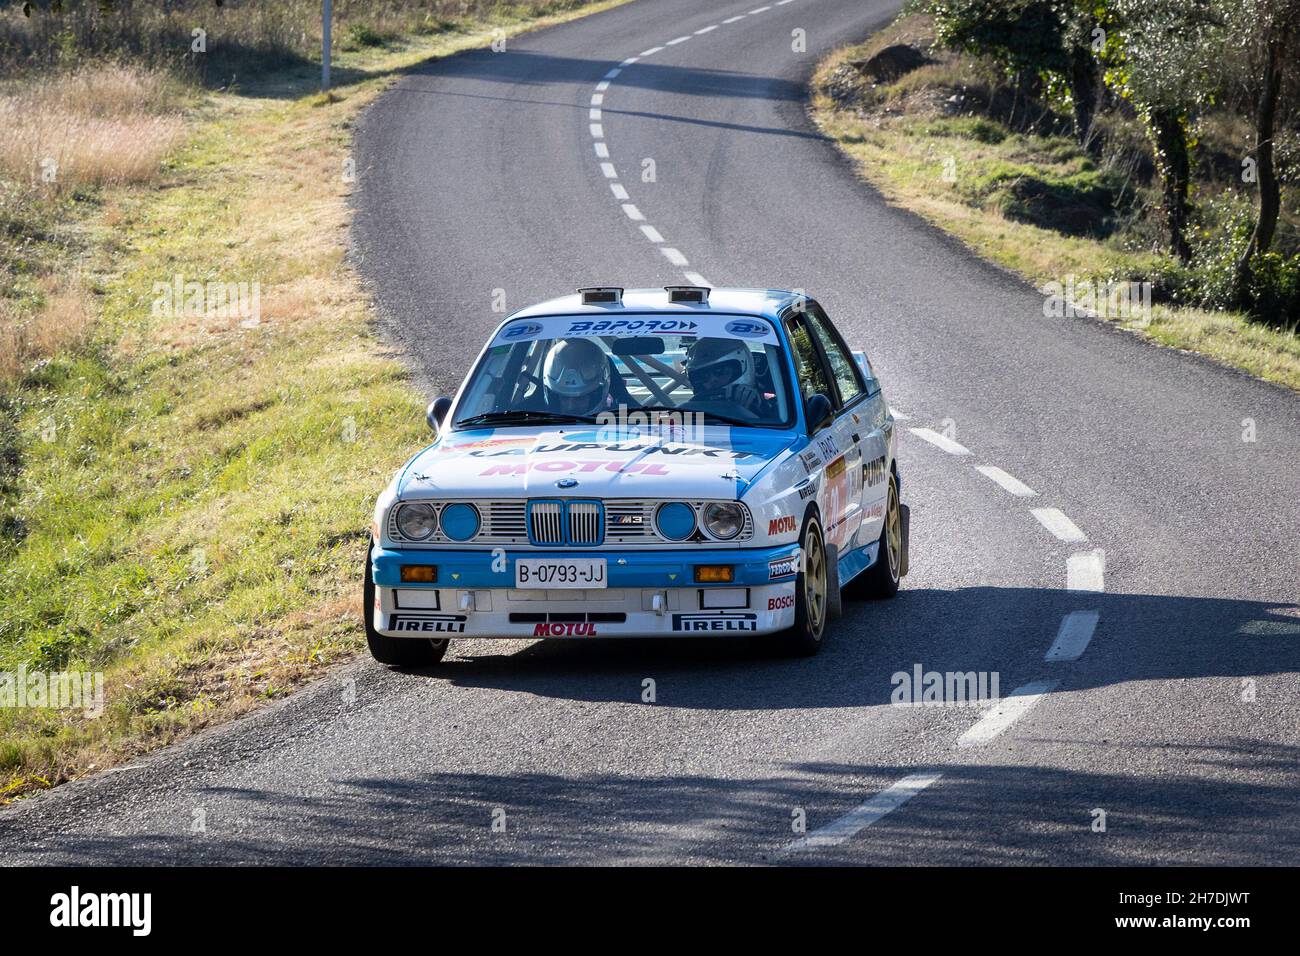 Page 2 - Bmw M3 Car High Resolution Stock Photography and Images - Alamy